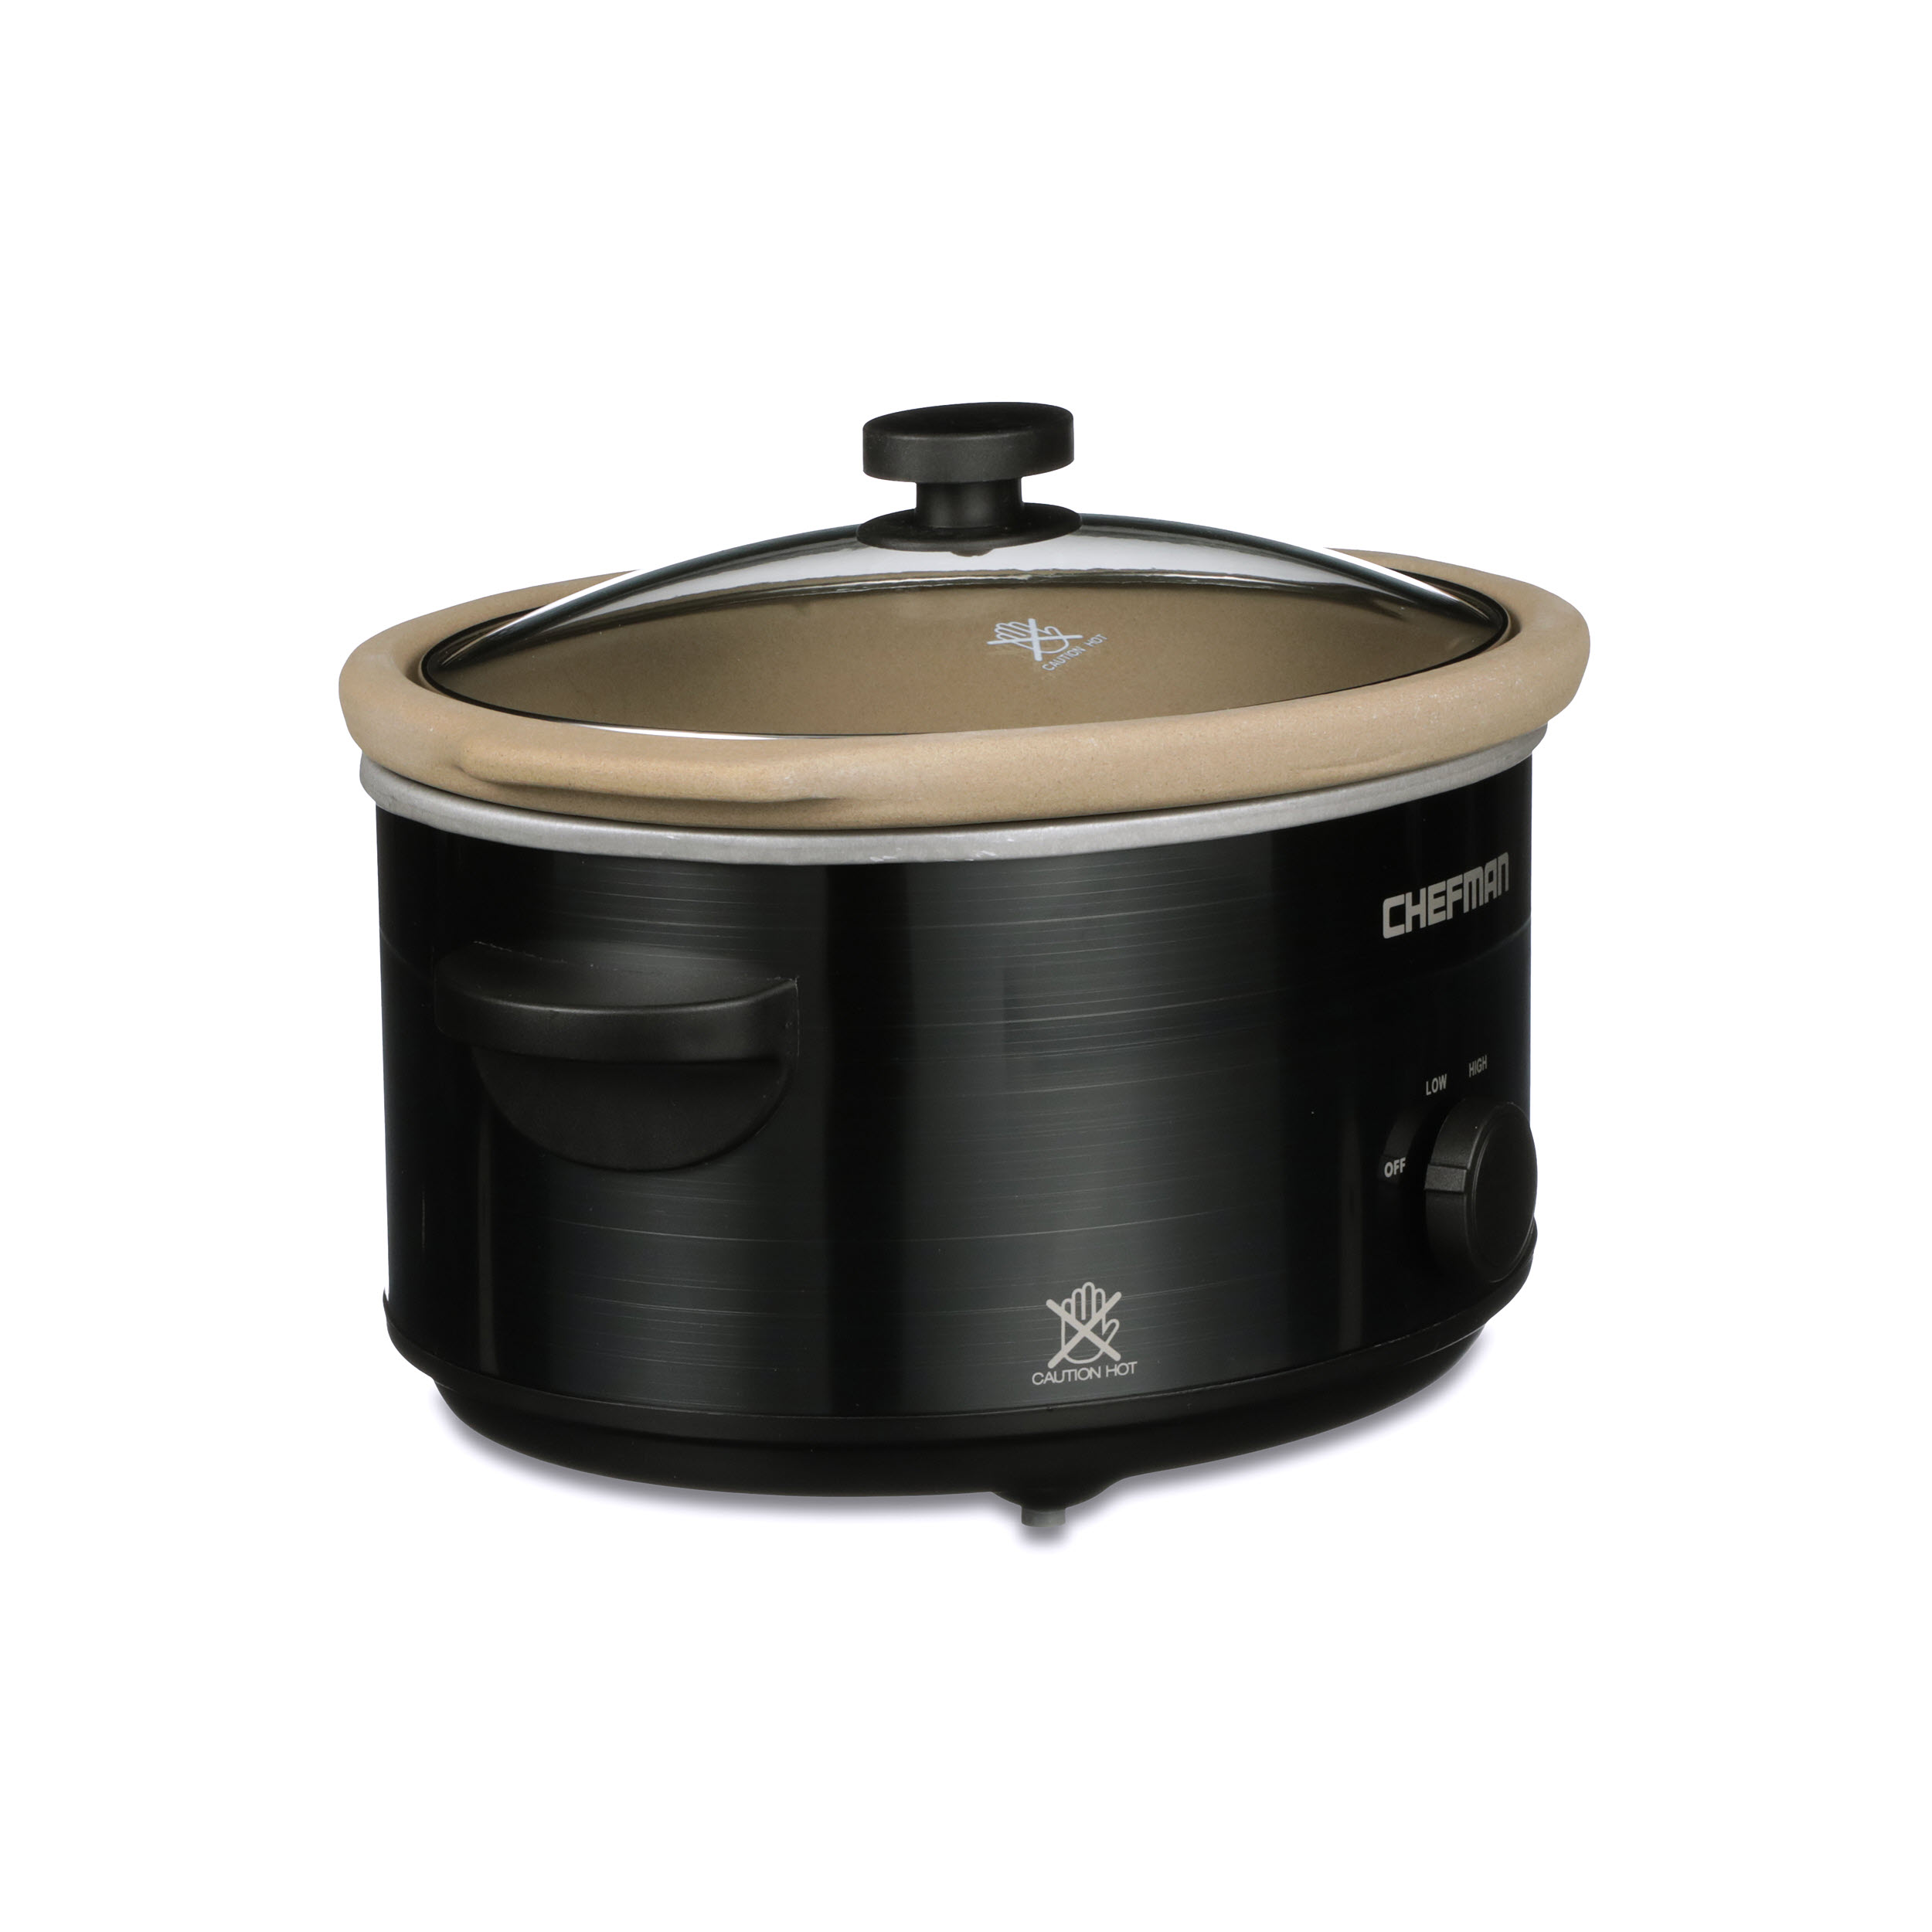 Chefman Stainless Steel Slow Cooker With Oven-Safe Insert, 6-Quart - Bed  Bath & Beyond - 33227148